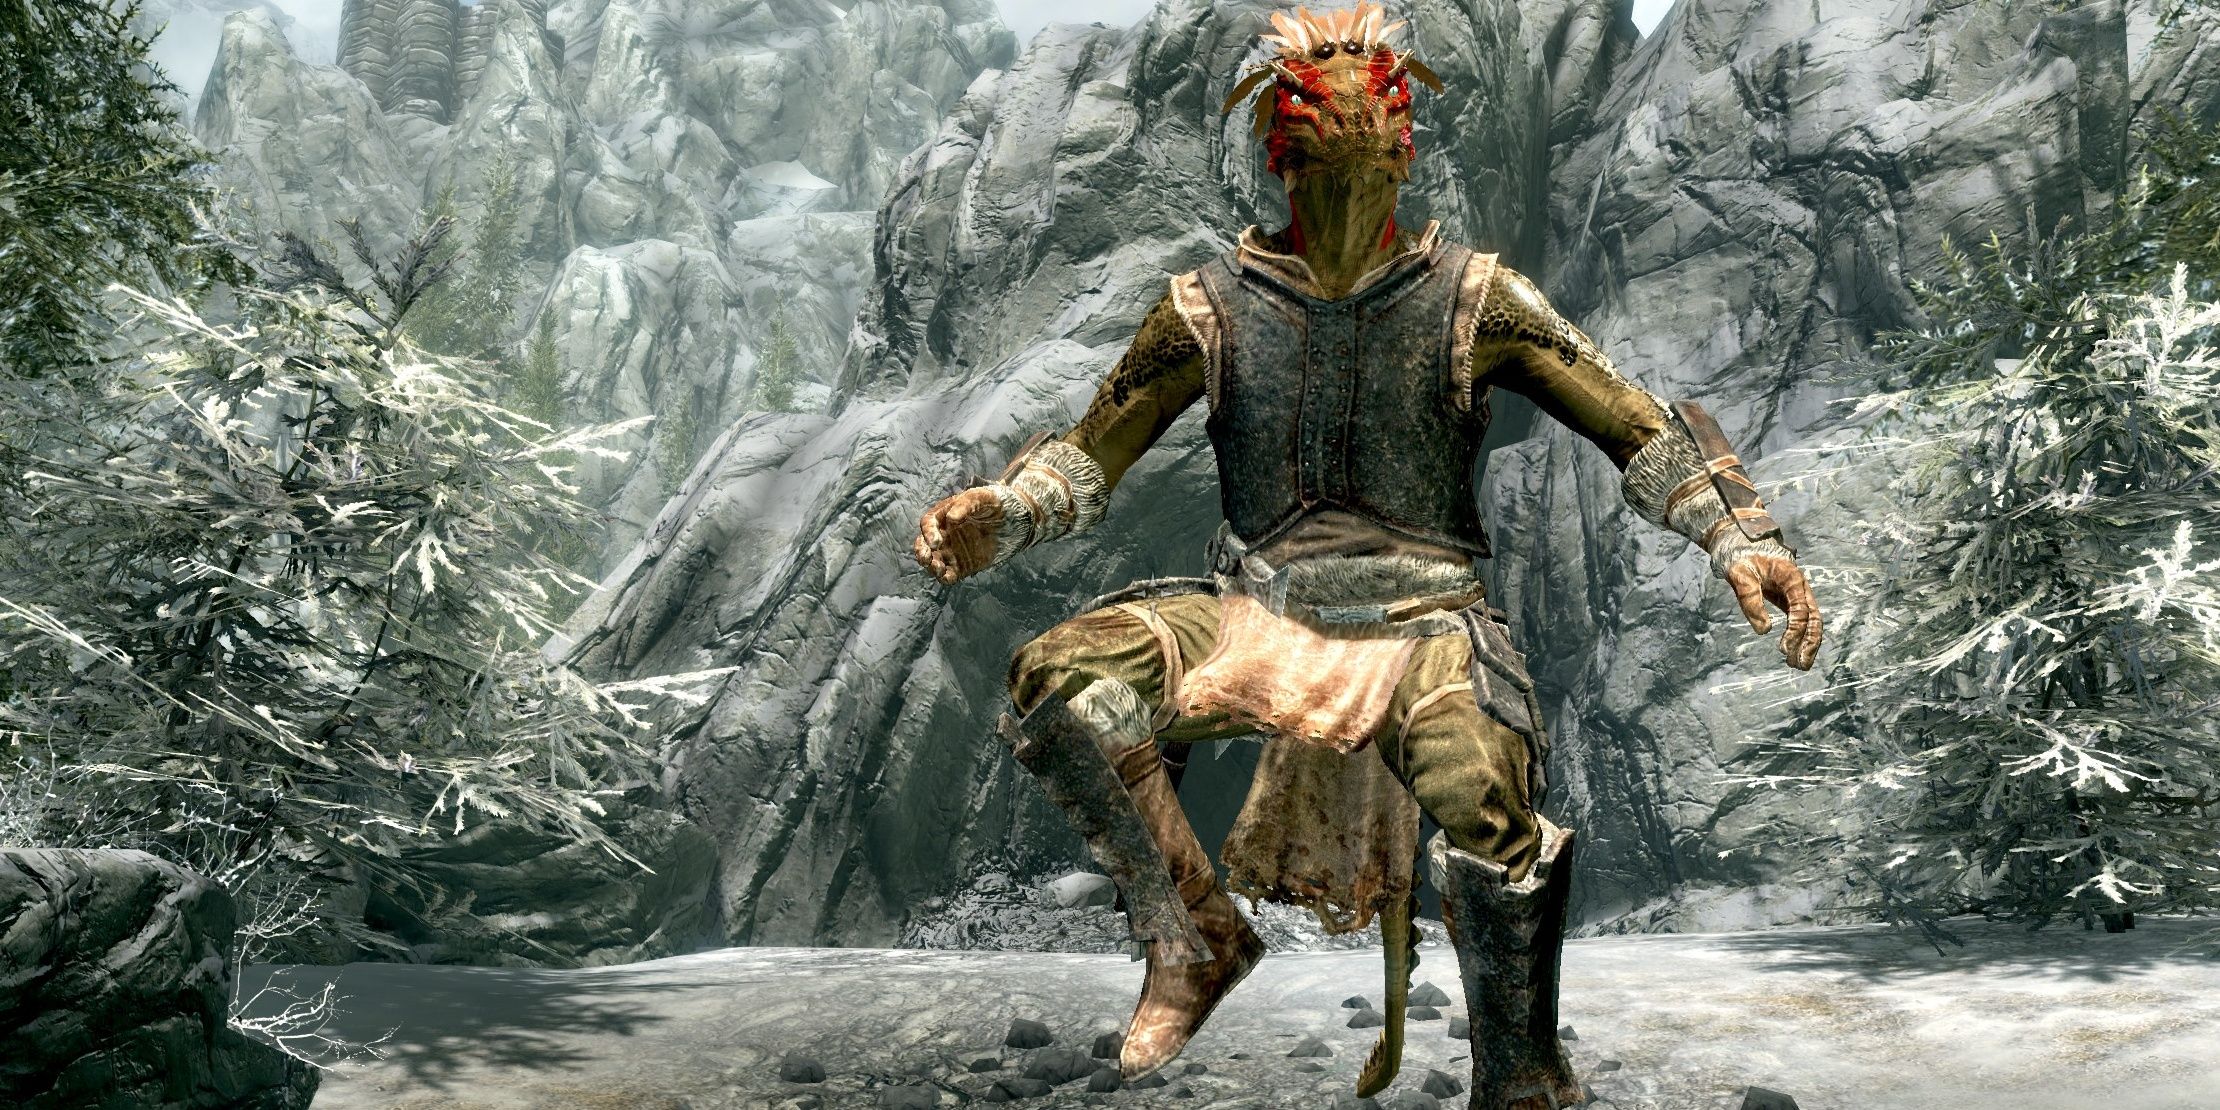 A character jumping in Skyrim